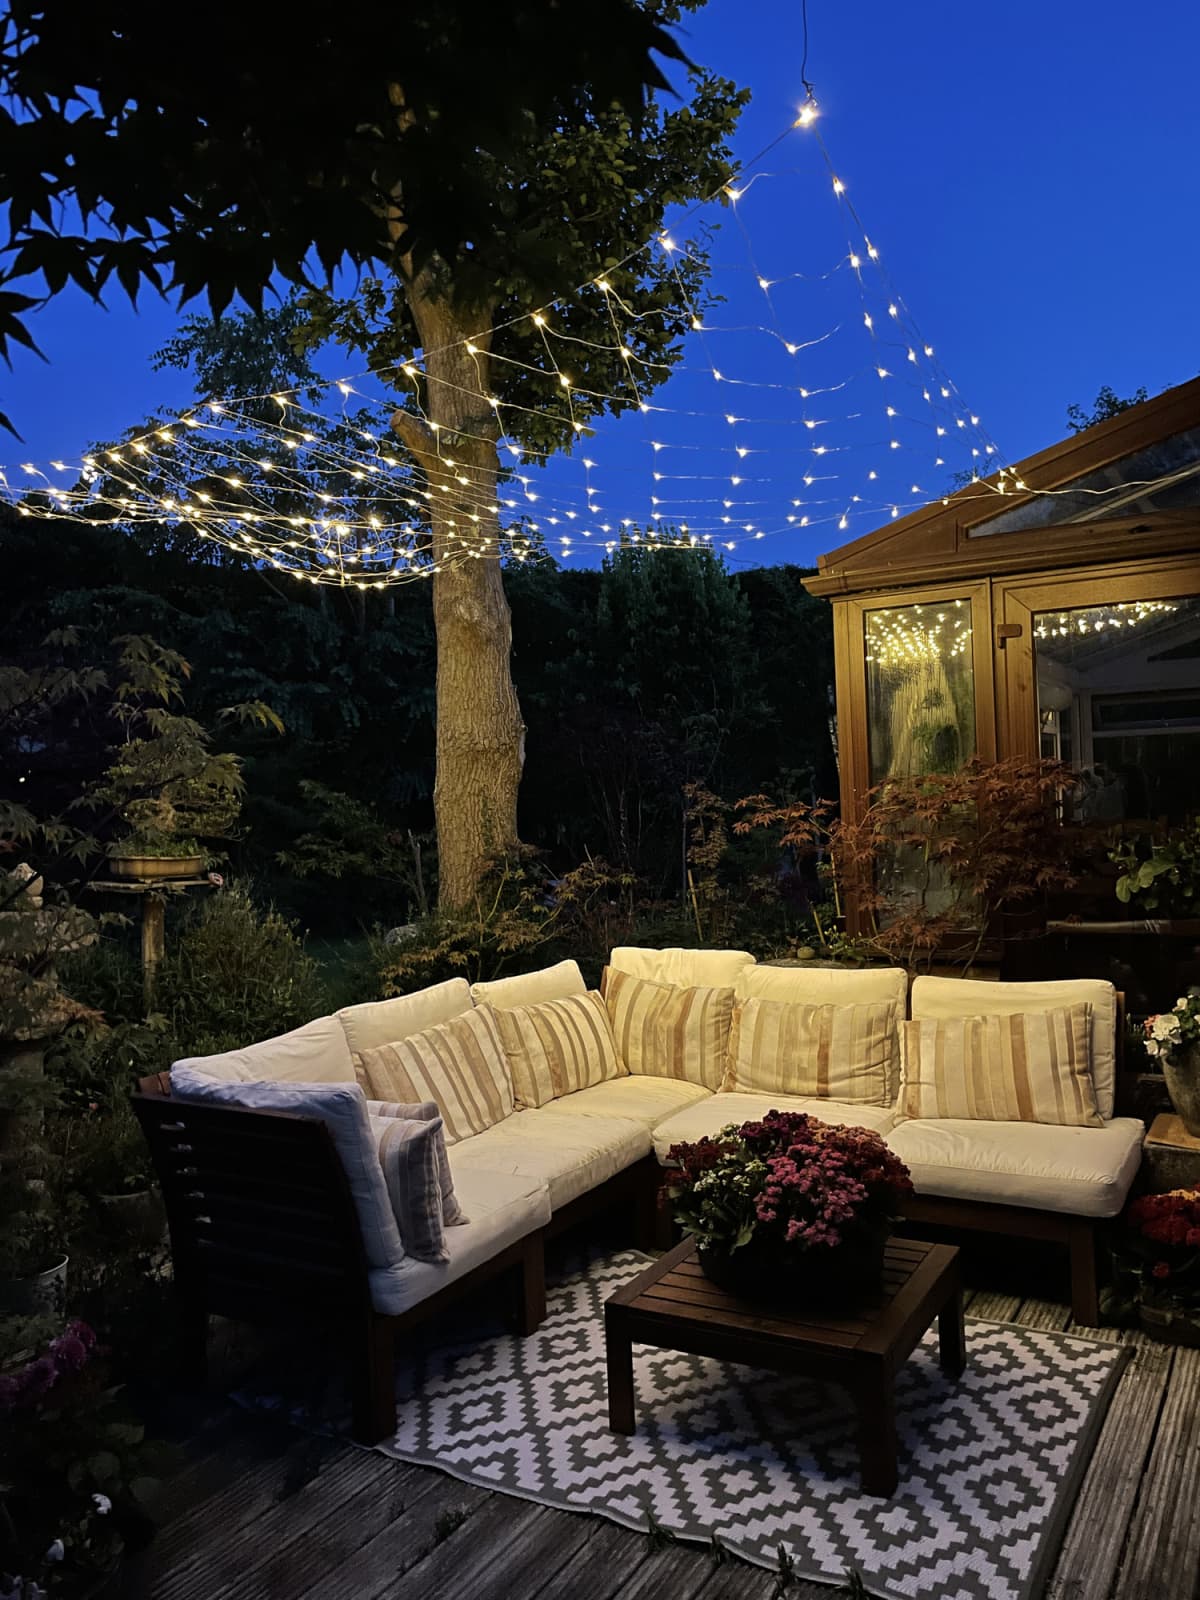 An outdoor lounging area illuminated by string fairy lights during nighttime